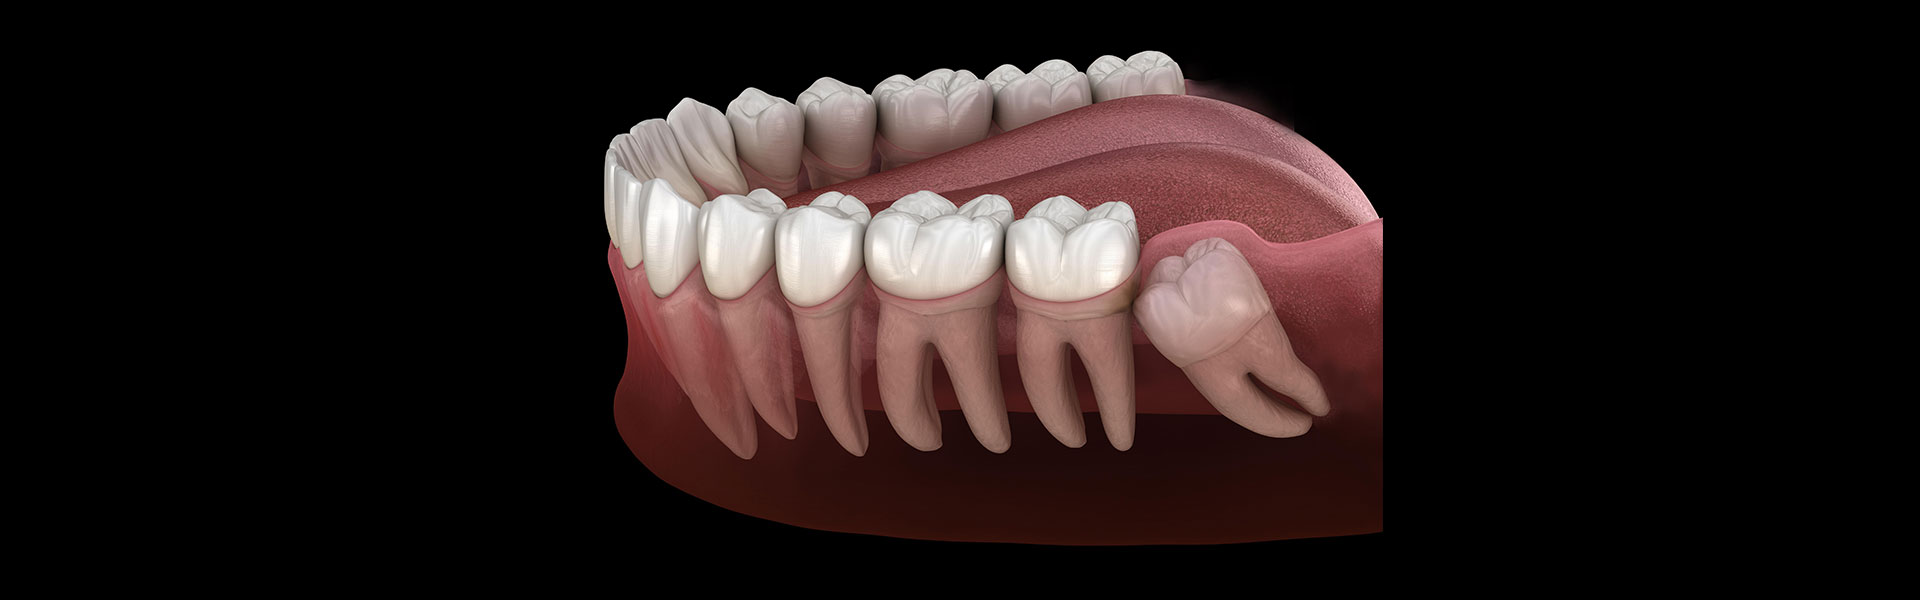 Wisdom Teeth Removal: Anticipating the Experience Prior, During, and Following?